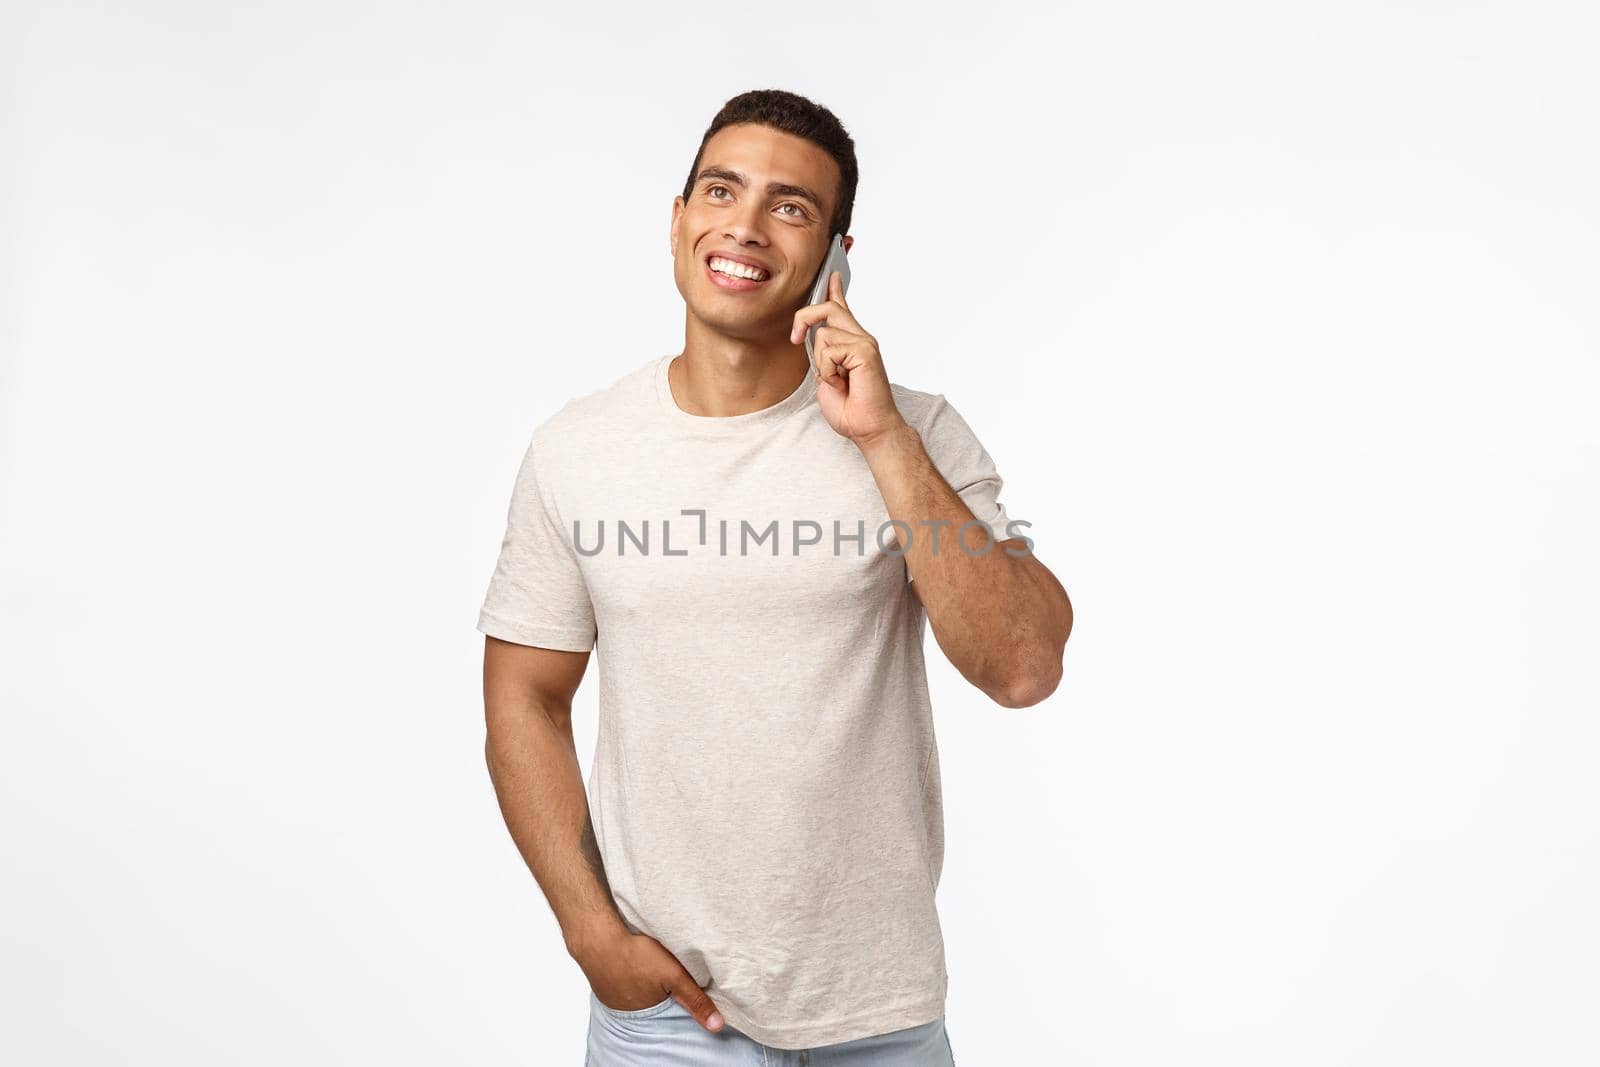 Cheerful, smiling young man in t-shirt, having conversation with friend, looking up enthusiastic, hold hand in pocket casually, smartphone pressed to ear, talking joyfully, white background.